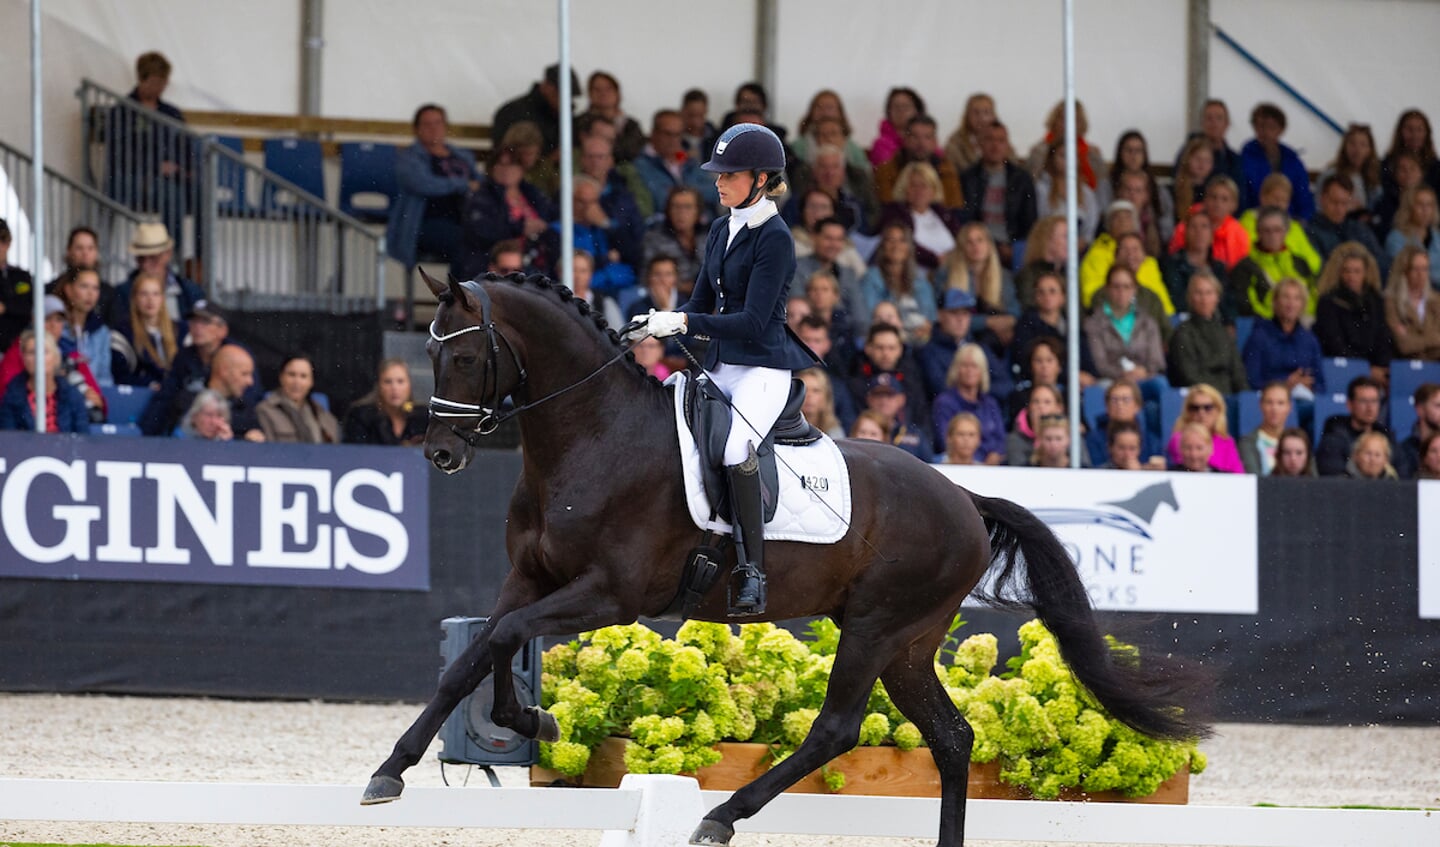 Dinja van Liere - On Air
Longines FEI/WBFSH World Breeding Dressage Championships for Young Horses 2023
© DigiShots